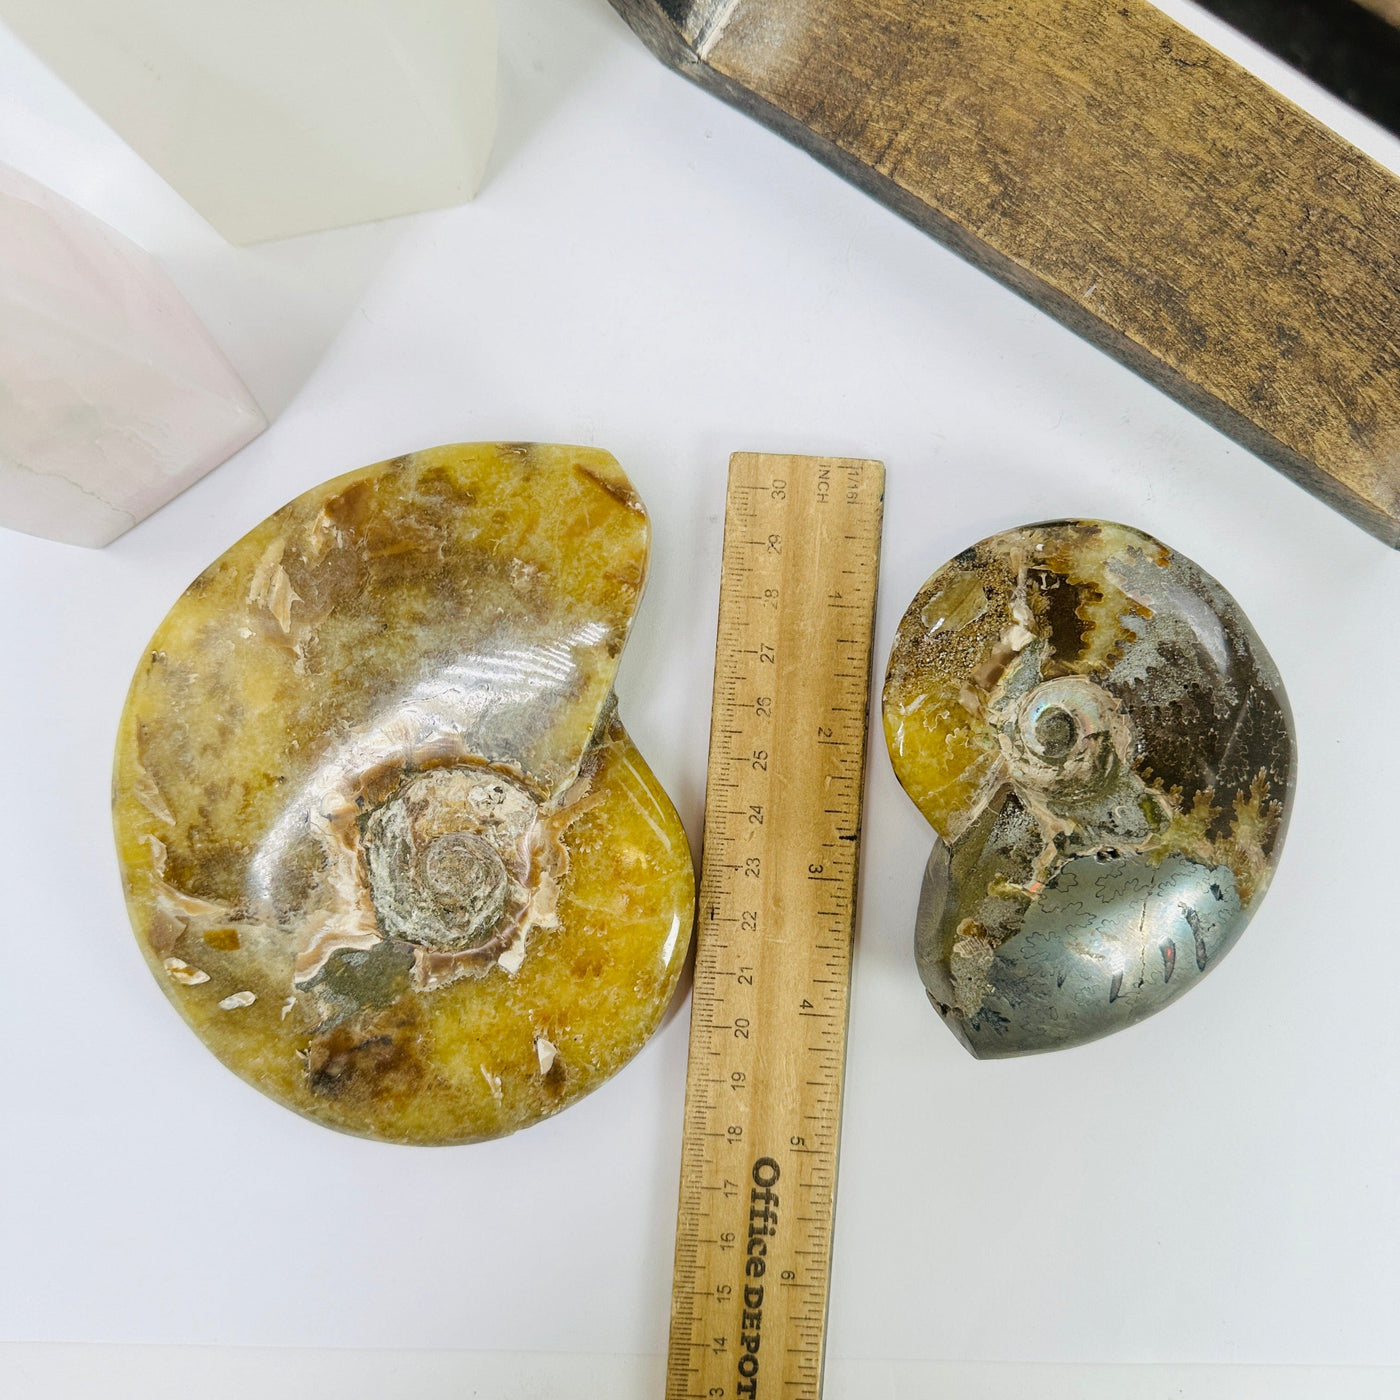 ammonite next to a ruler for size reference